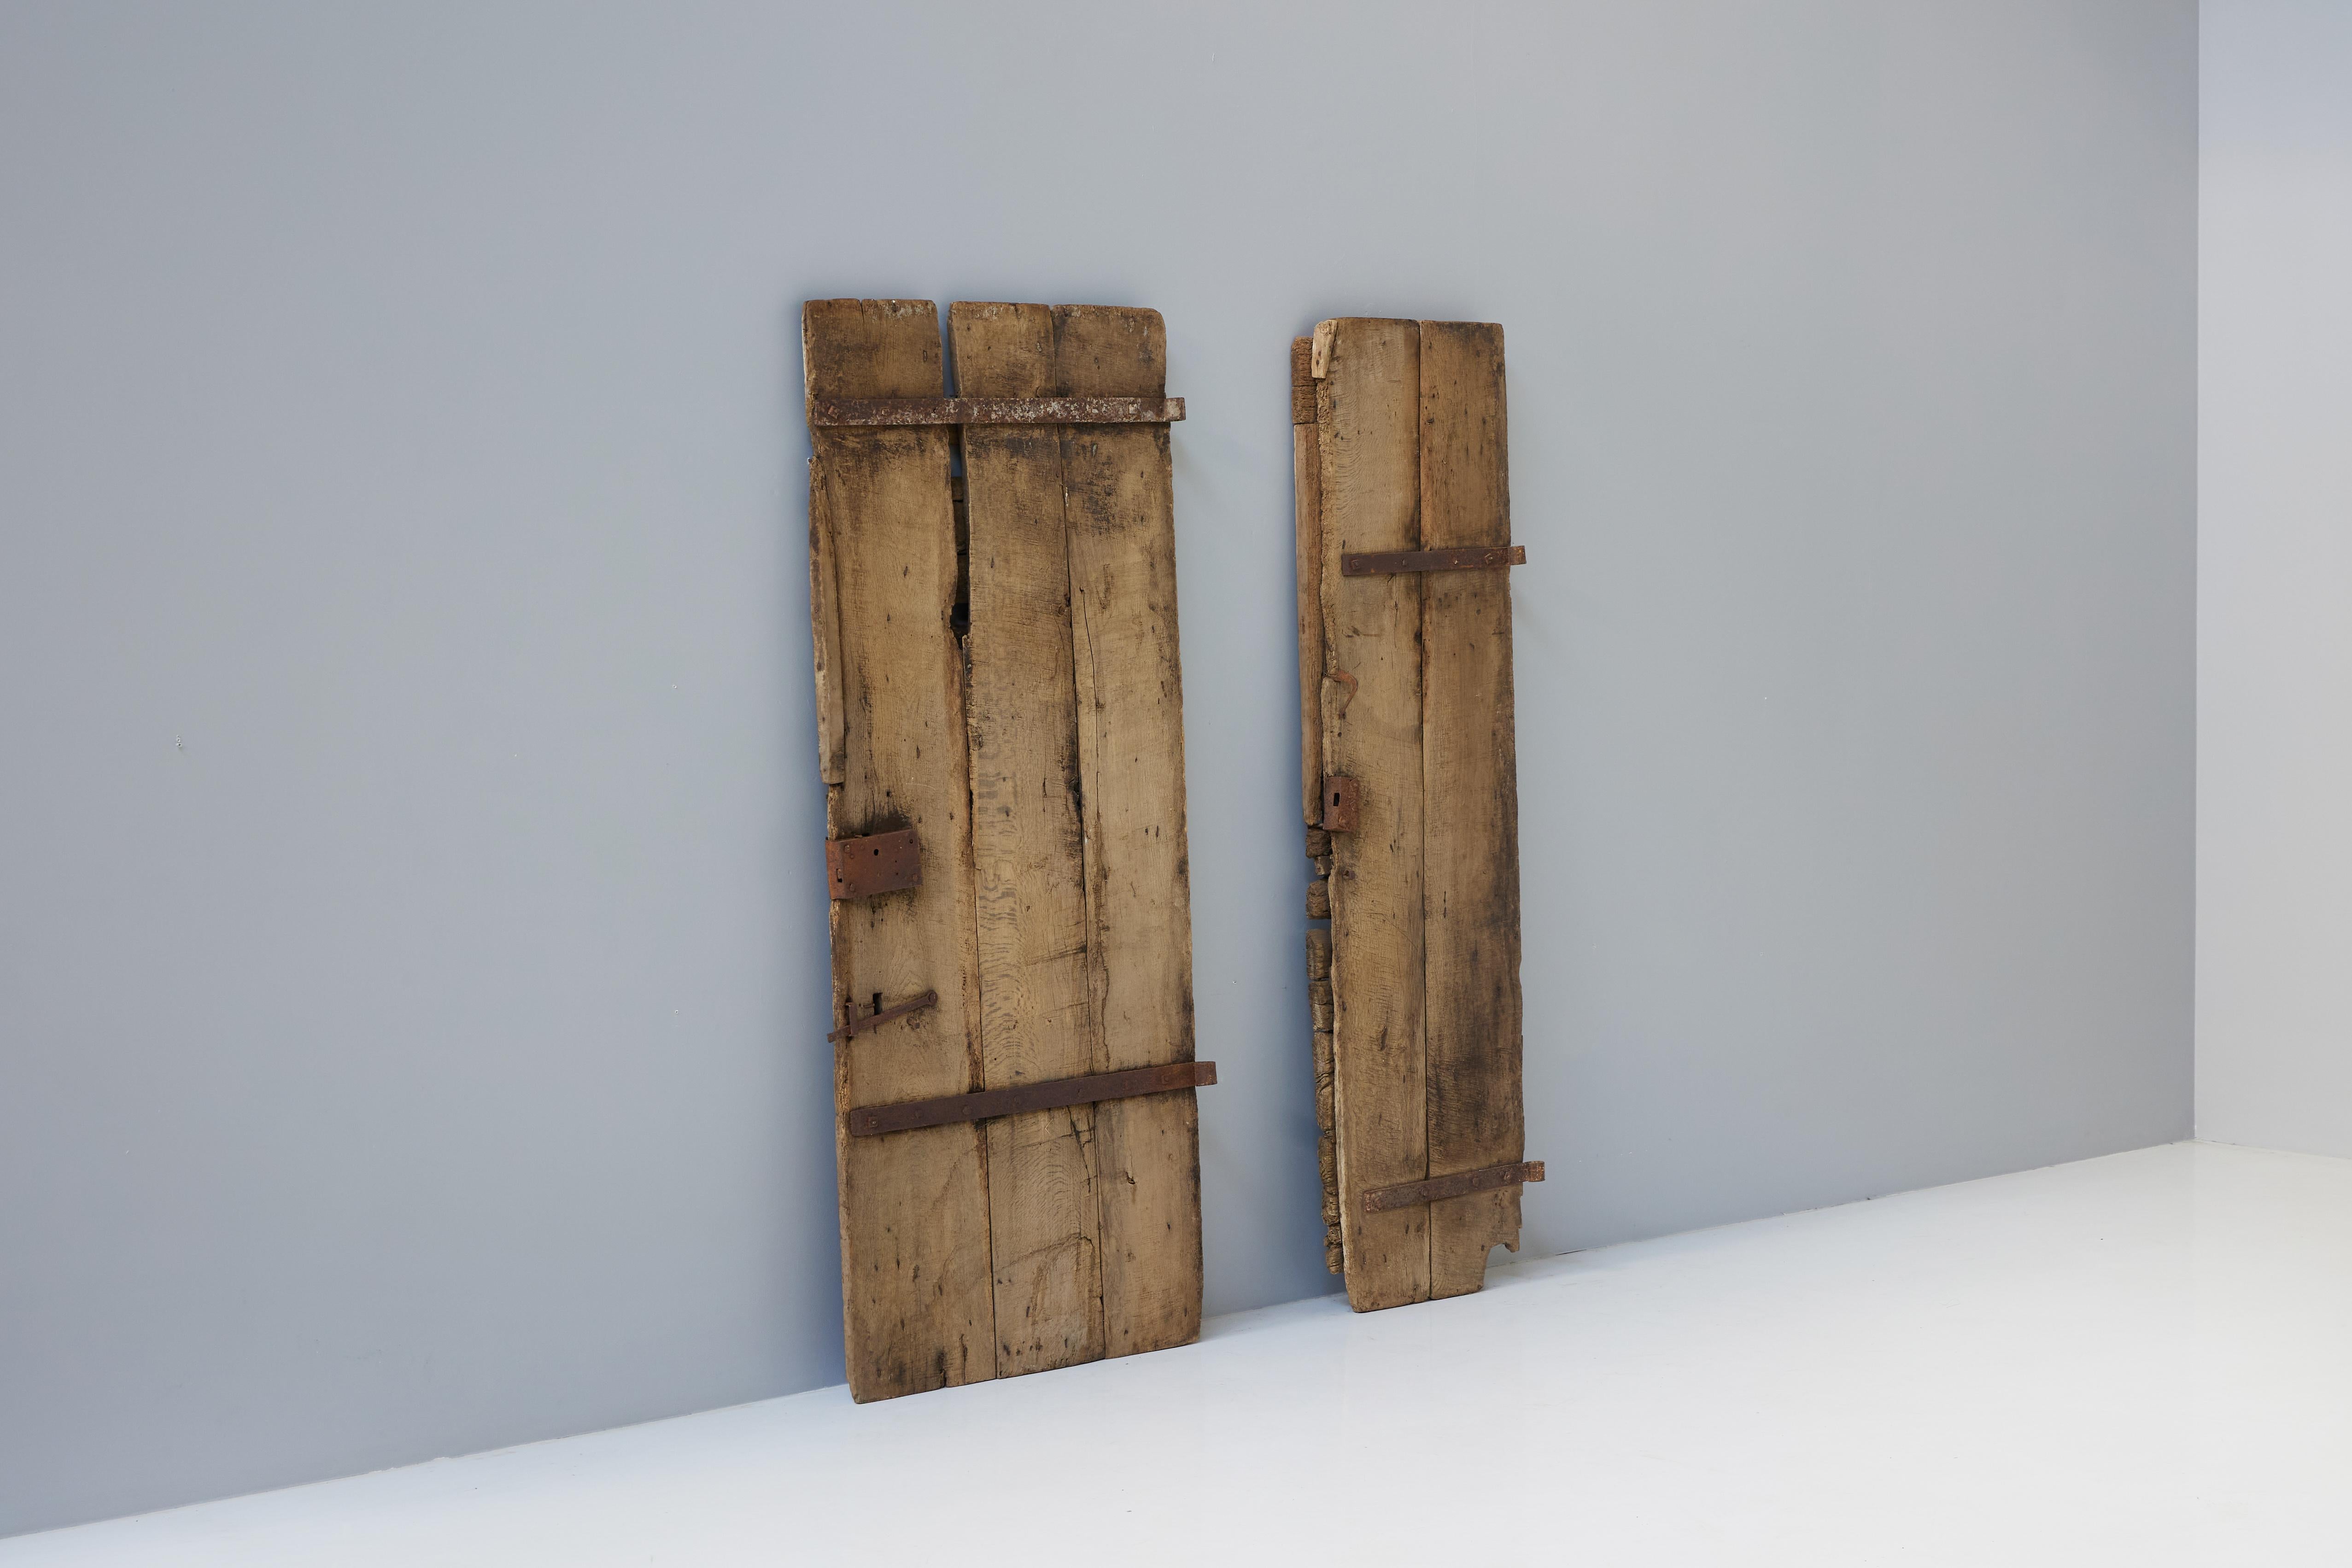 French Rustic Art Populaire Doors, France, 18th Century For Sale